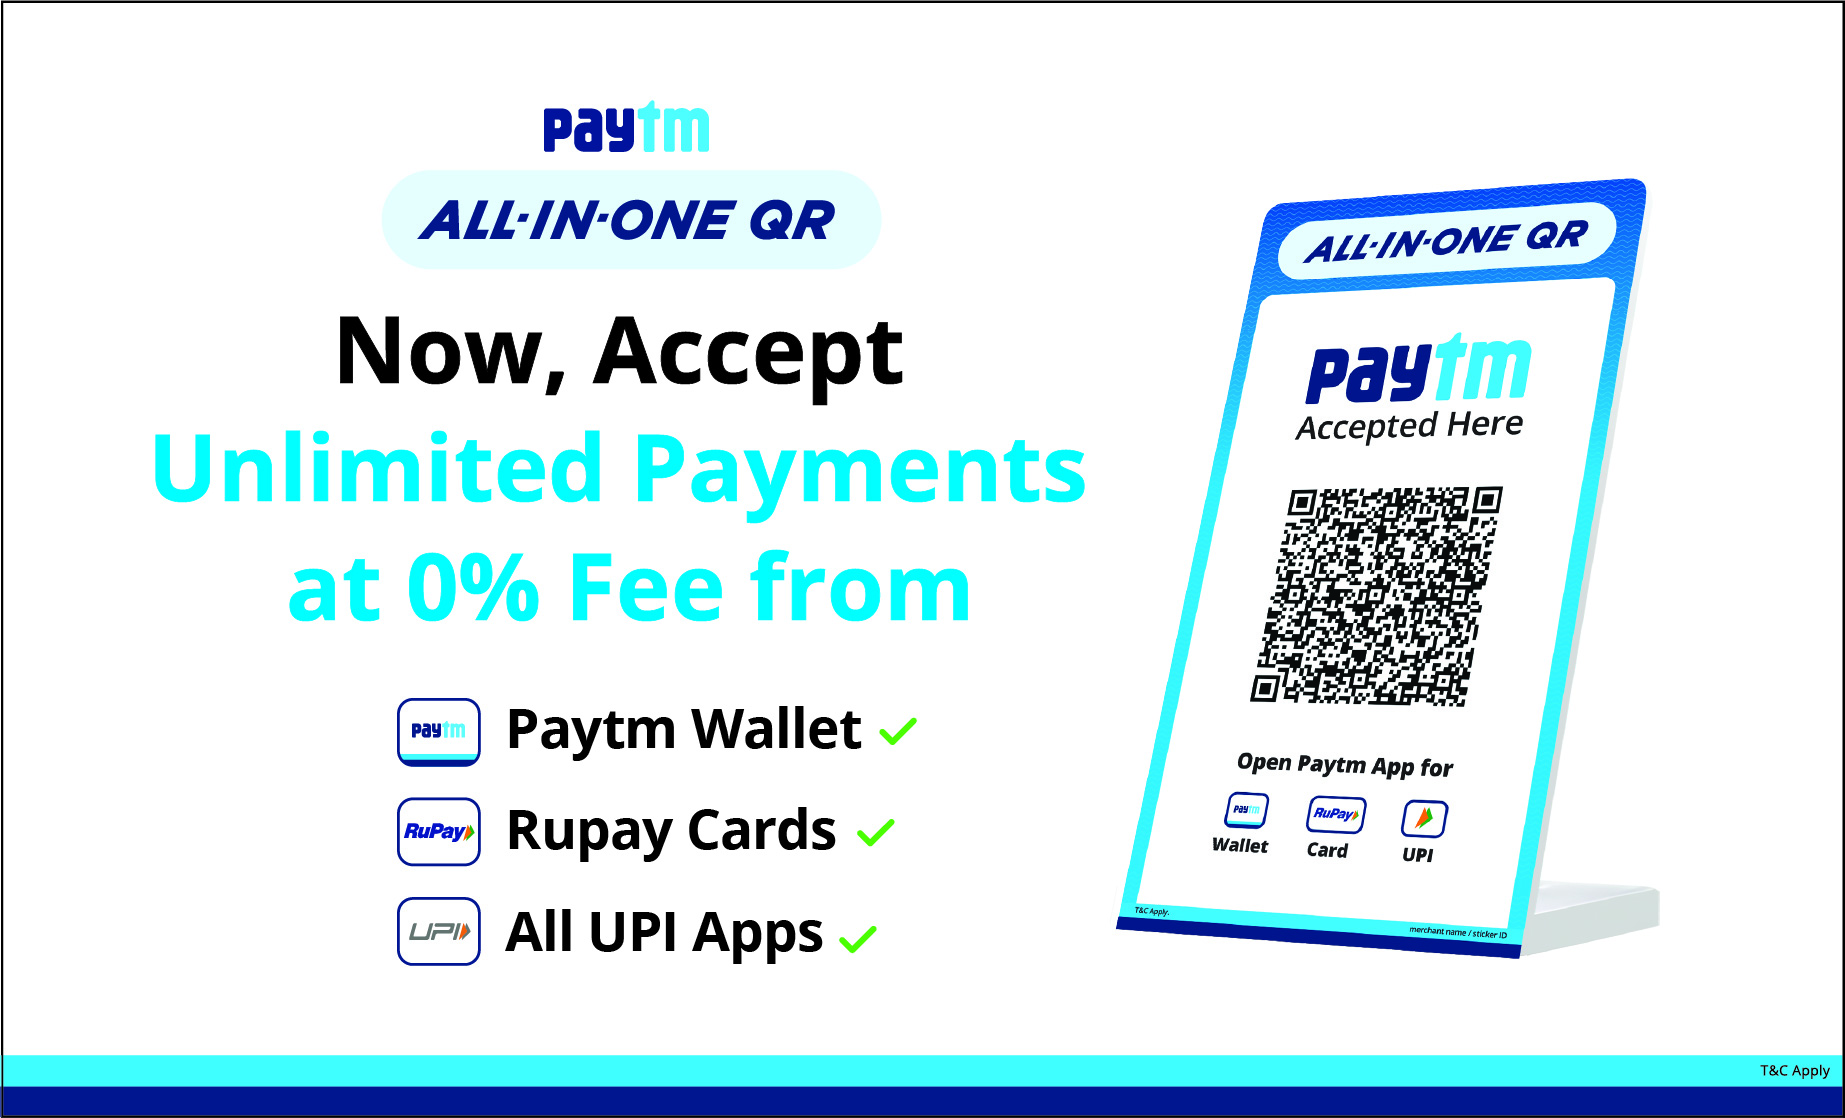 Paytm launches All-in-One QR for merchants with unlimited payments at 0% fee decoding=